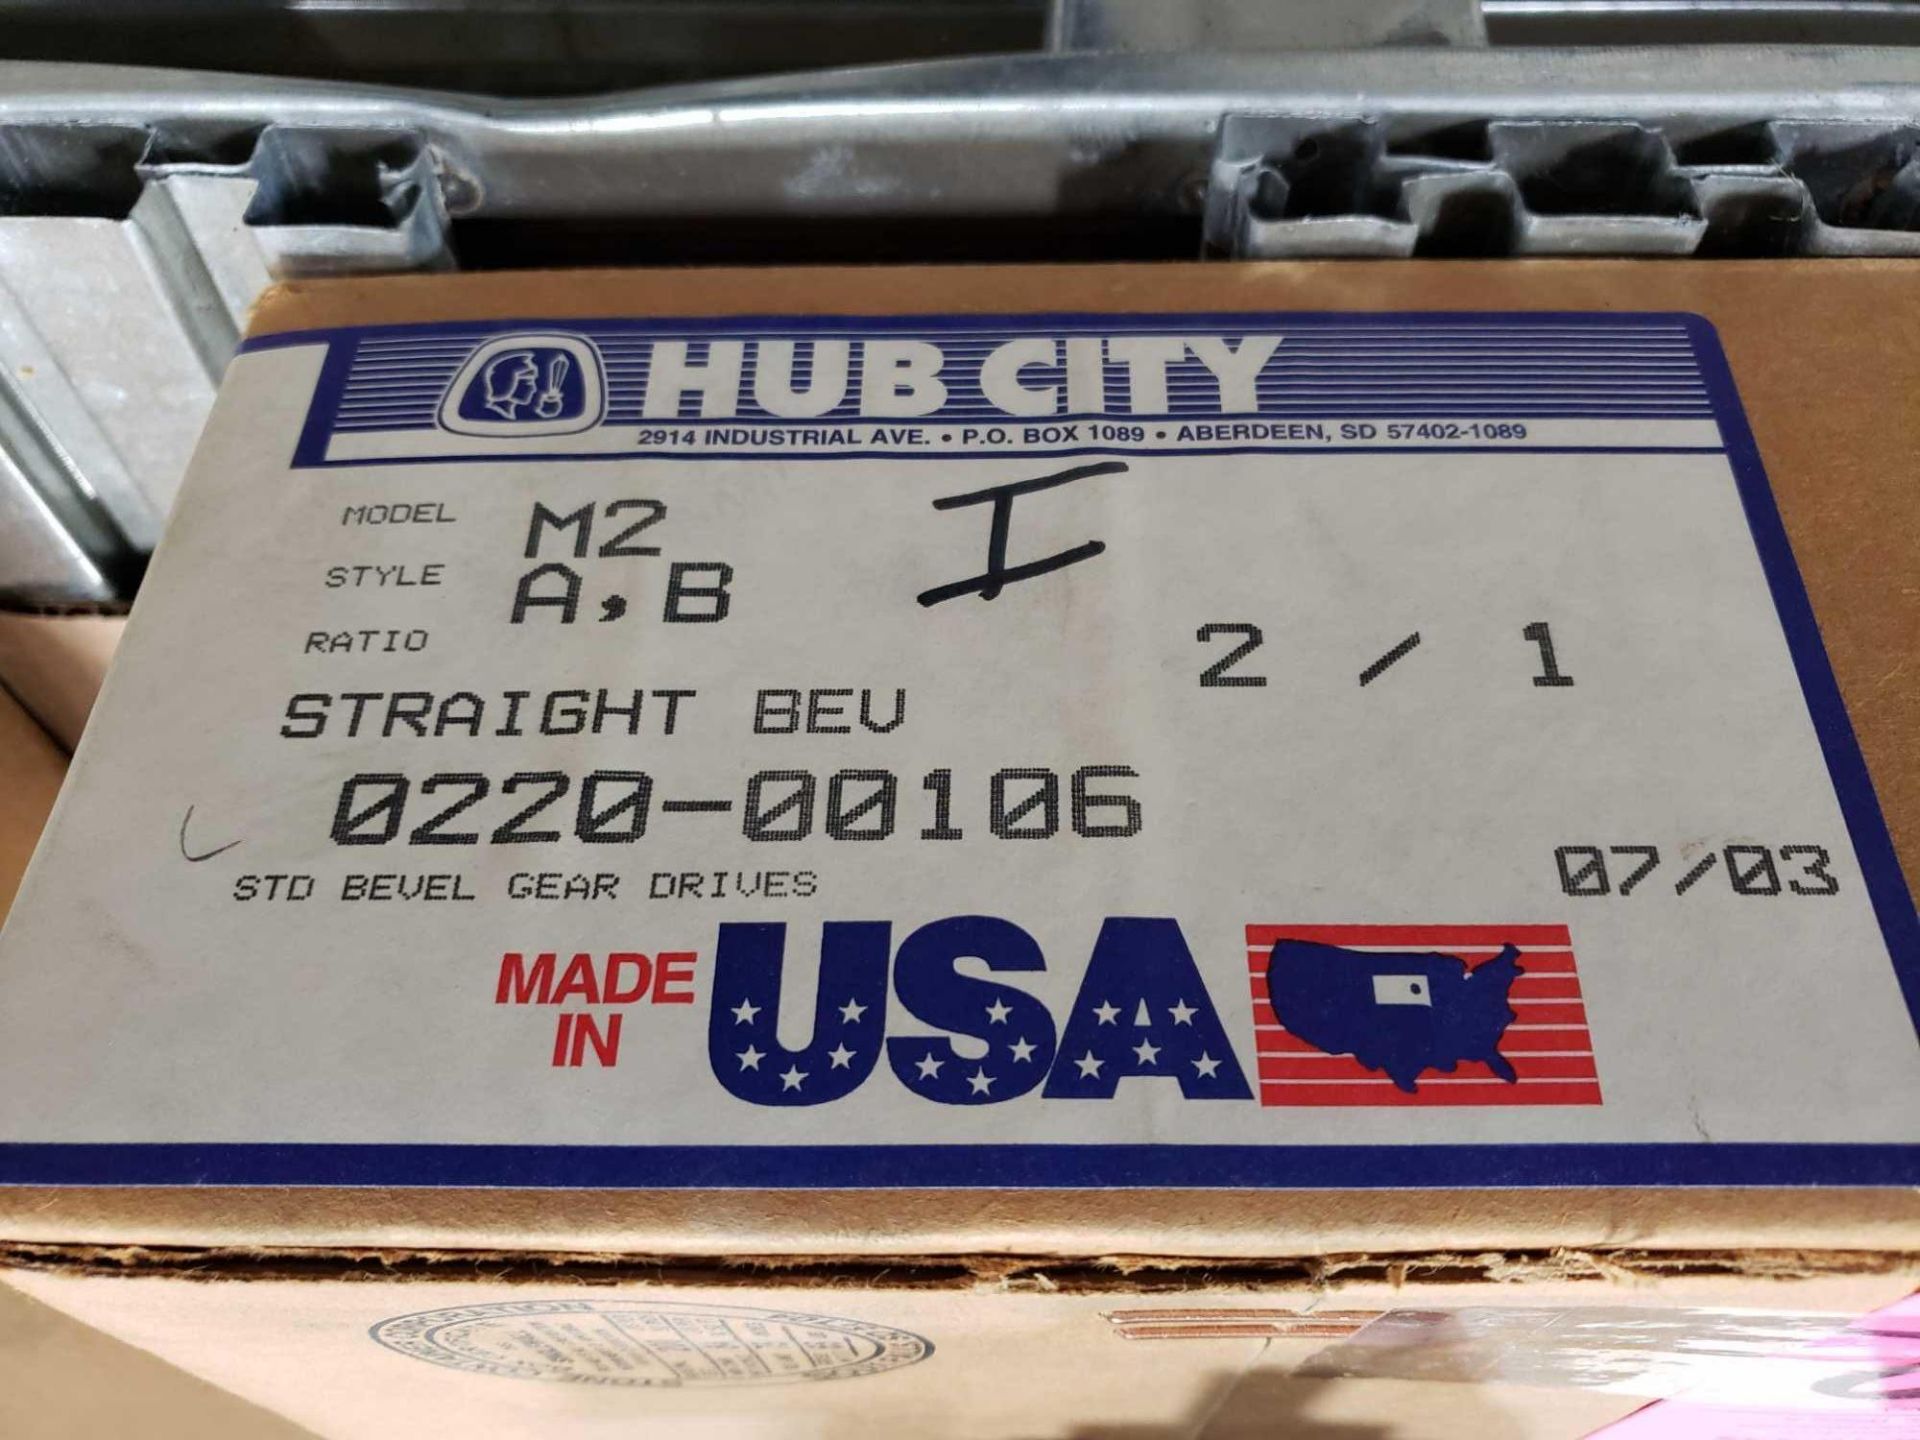 Hub City gear box speed reducer model M2, ratio 2?1, style AB. New in box. - Image 4 of 4